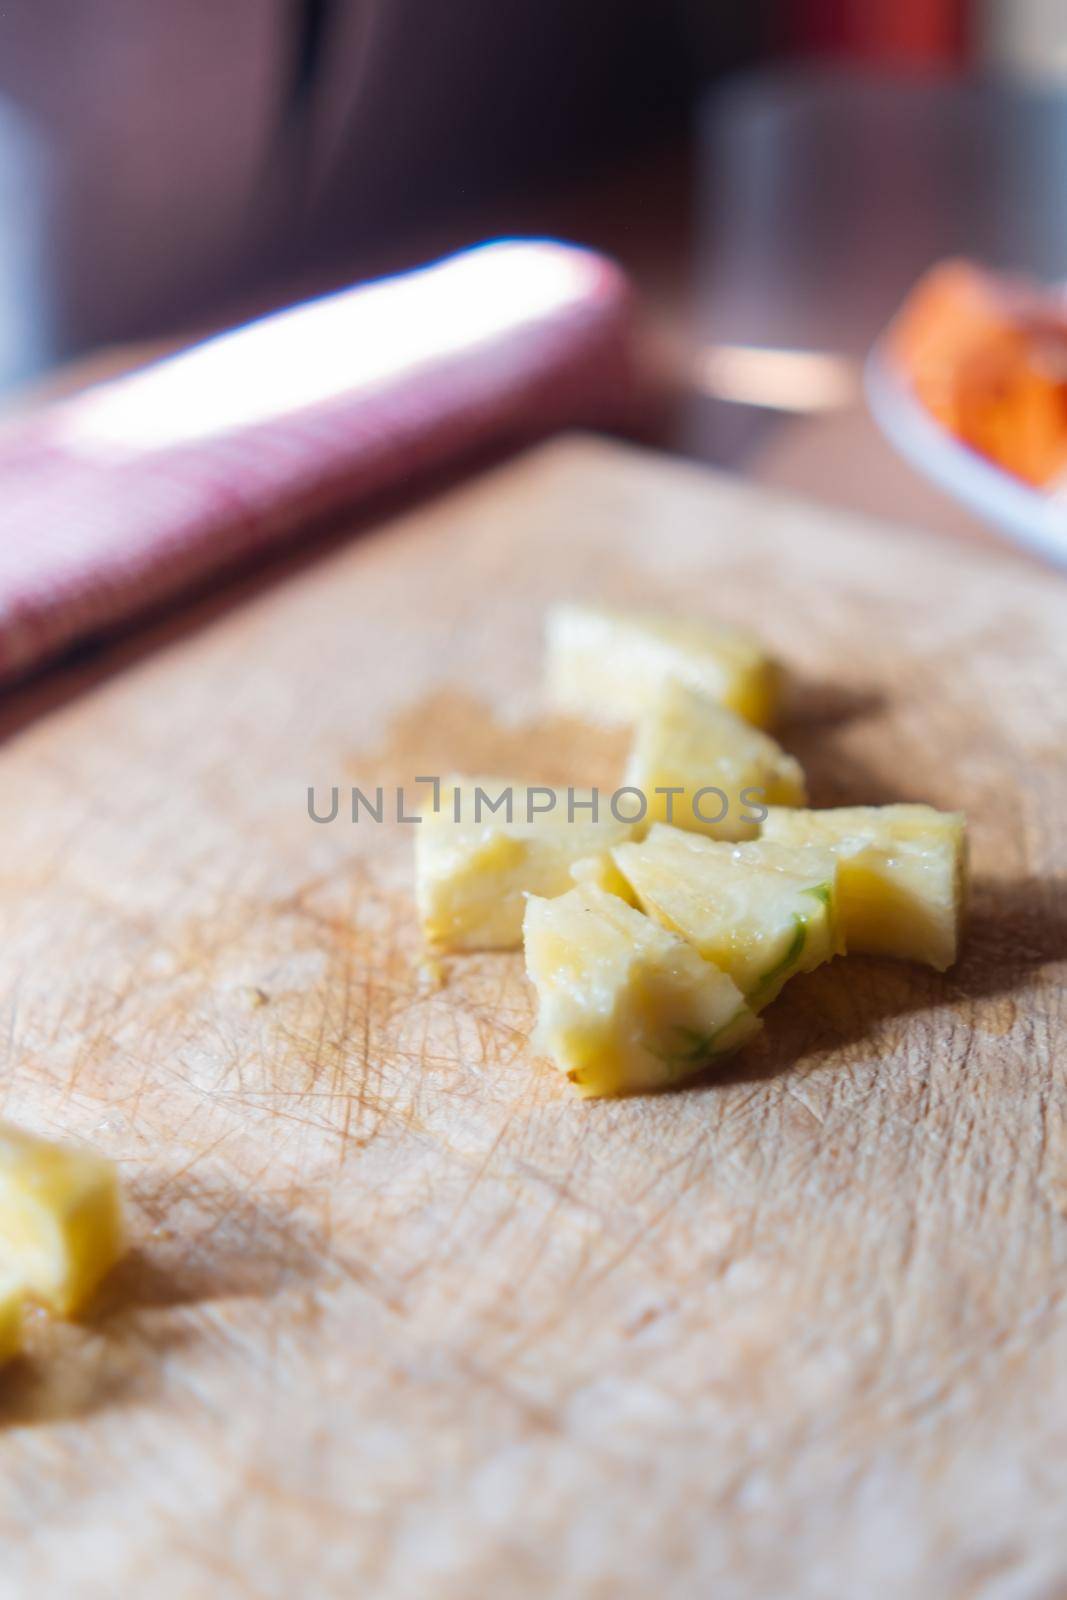 Pineapple slices scattered above wooden cutting board by Kanelbulle